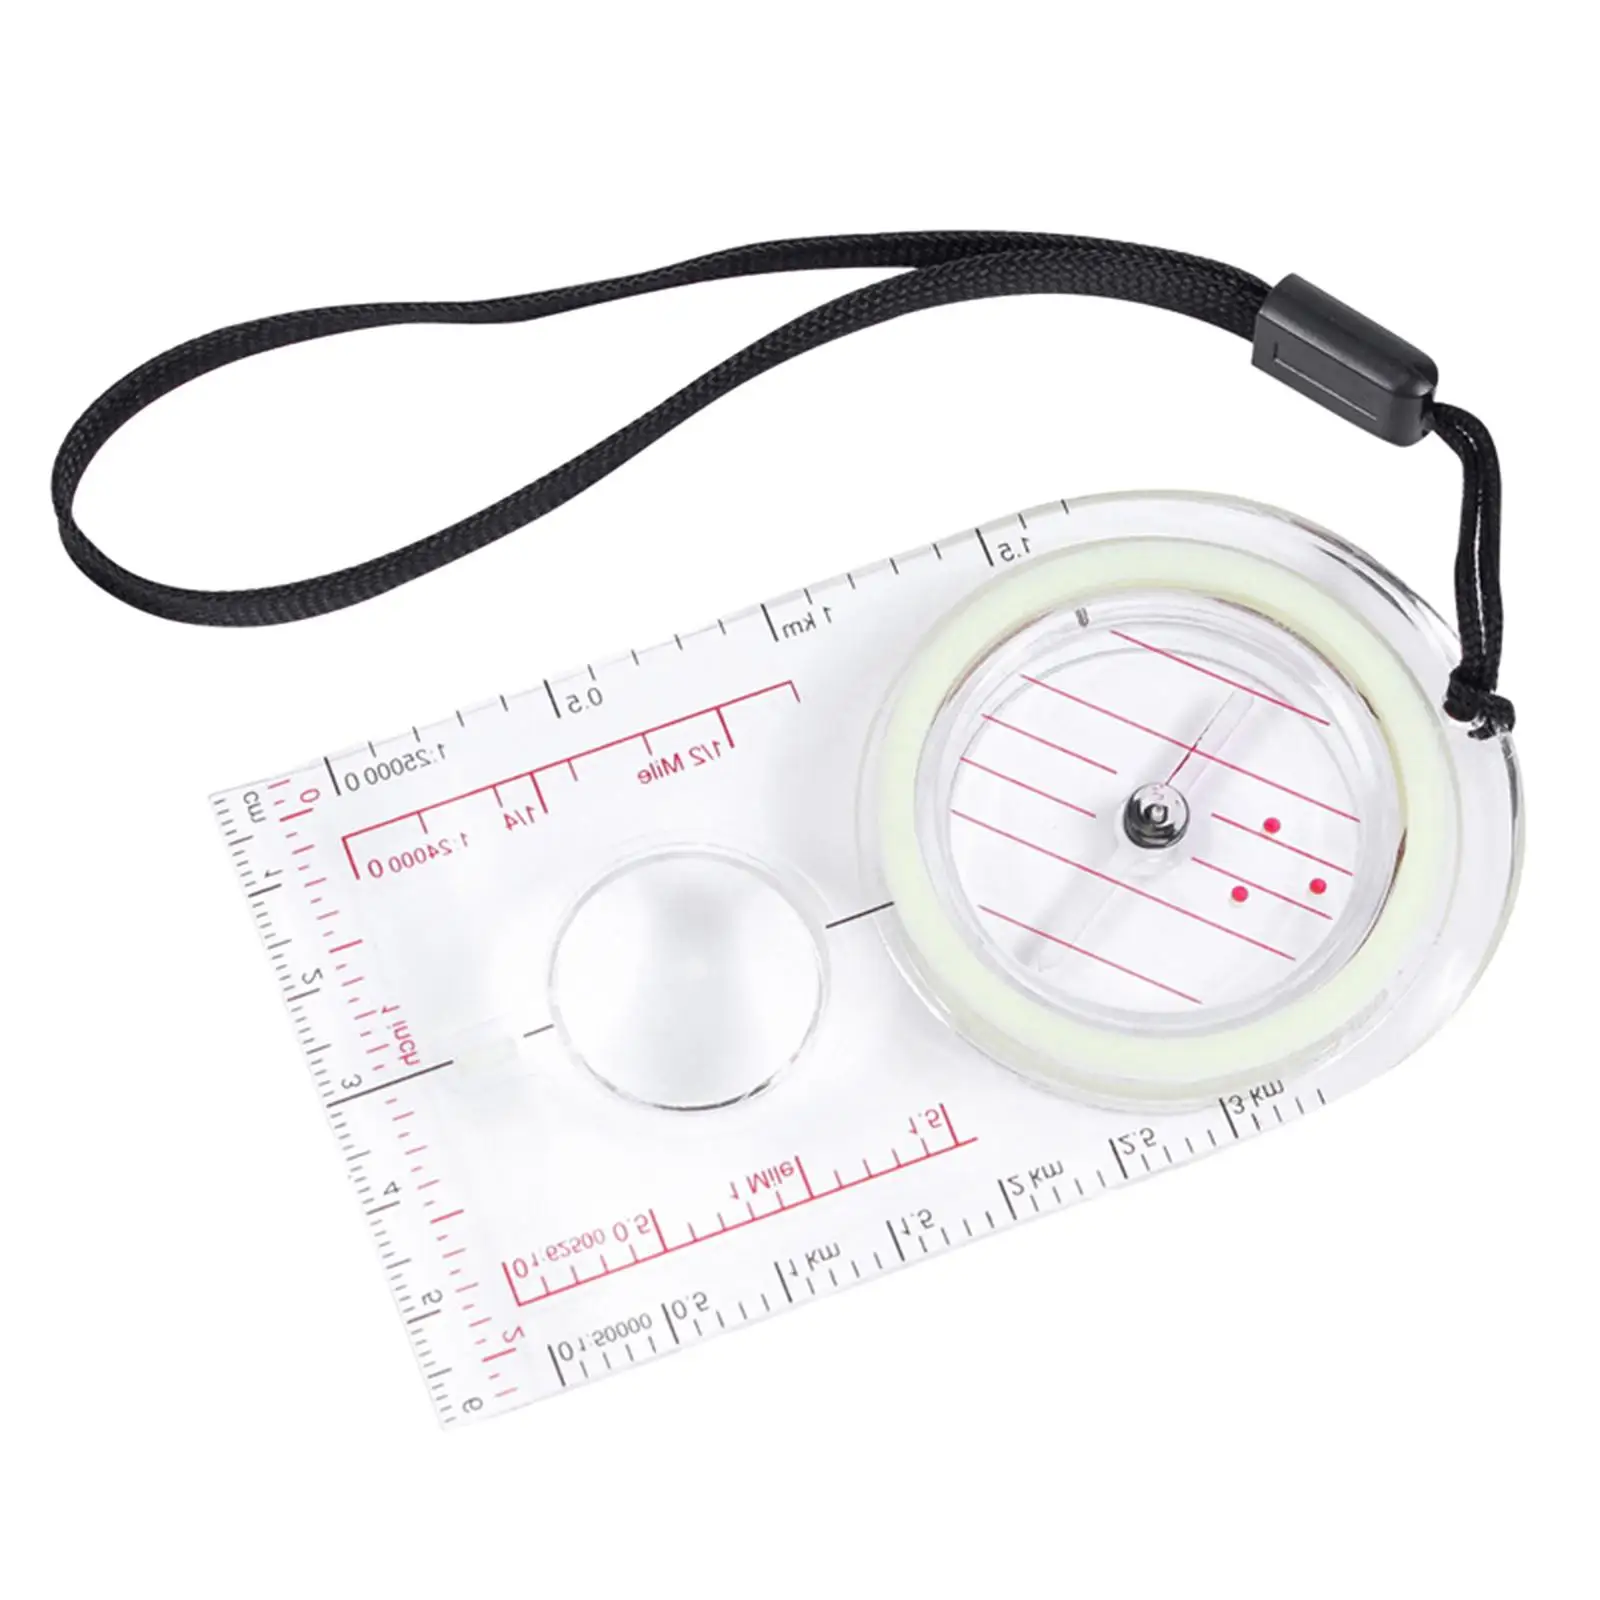 Orienteering Compass with Scale Lanyard Movement Strong Outdoor Luminous Compass for Camping Backpacking Reading